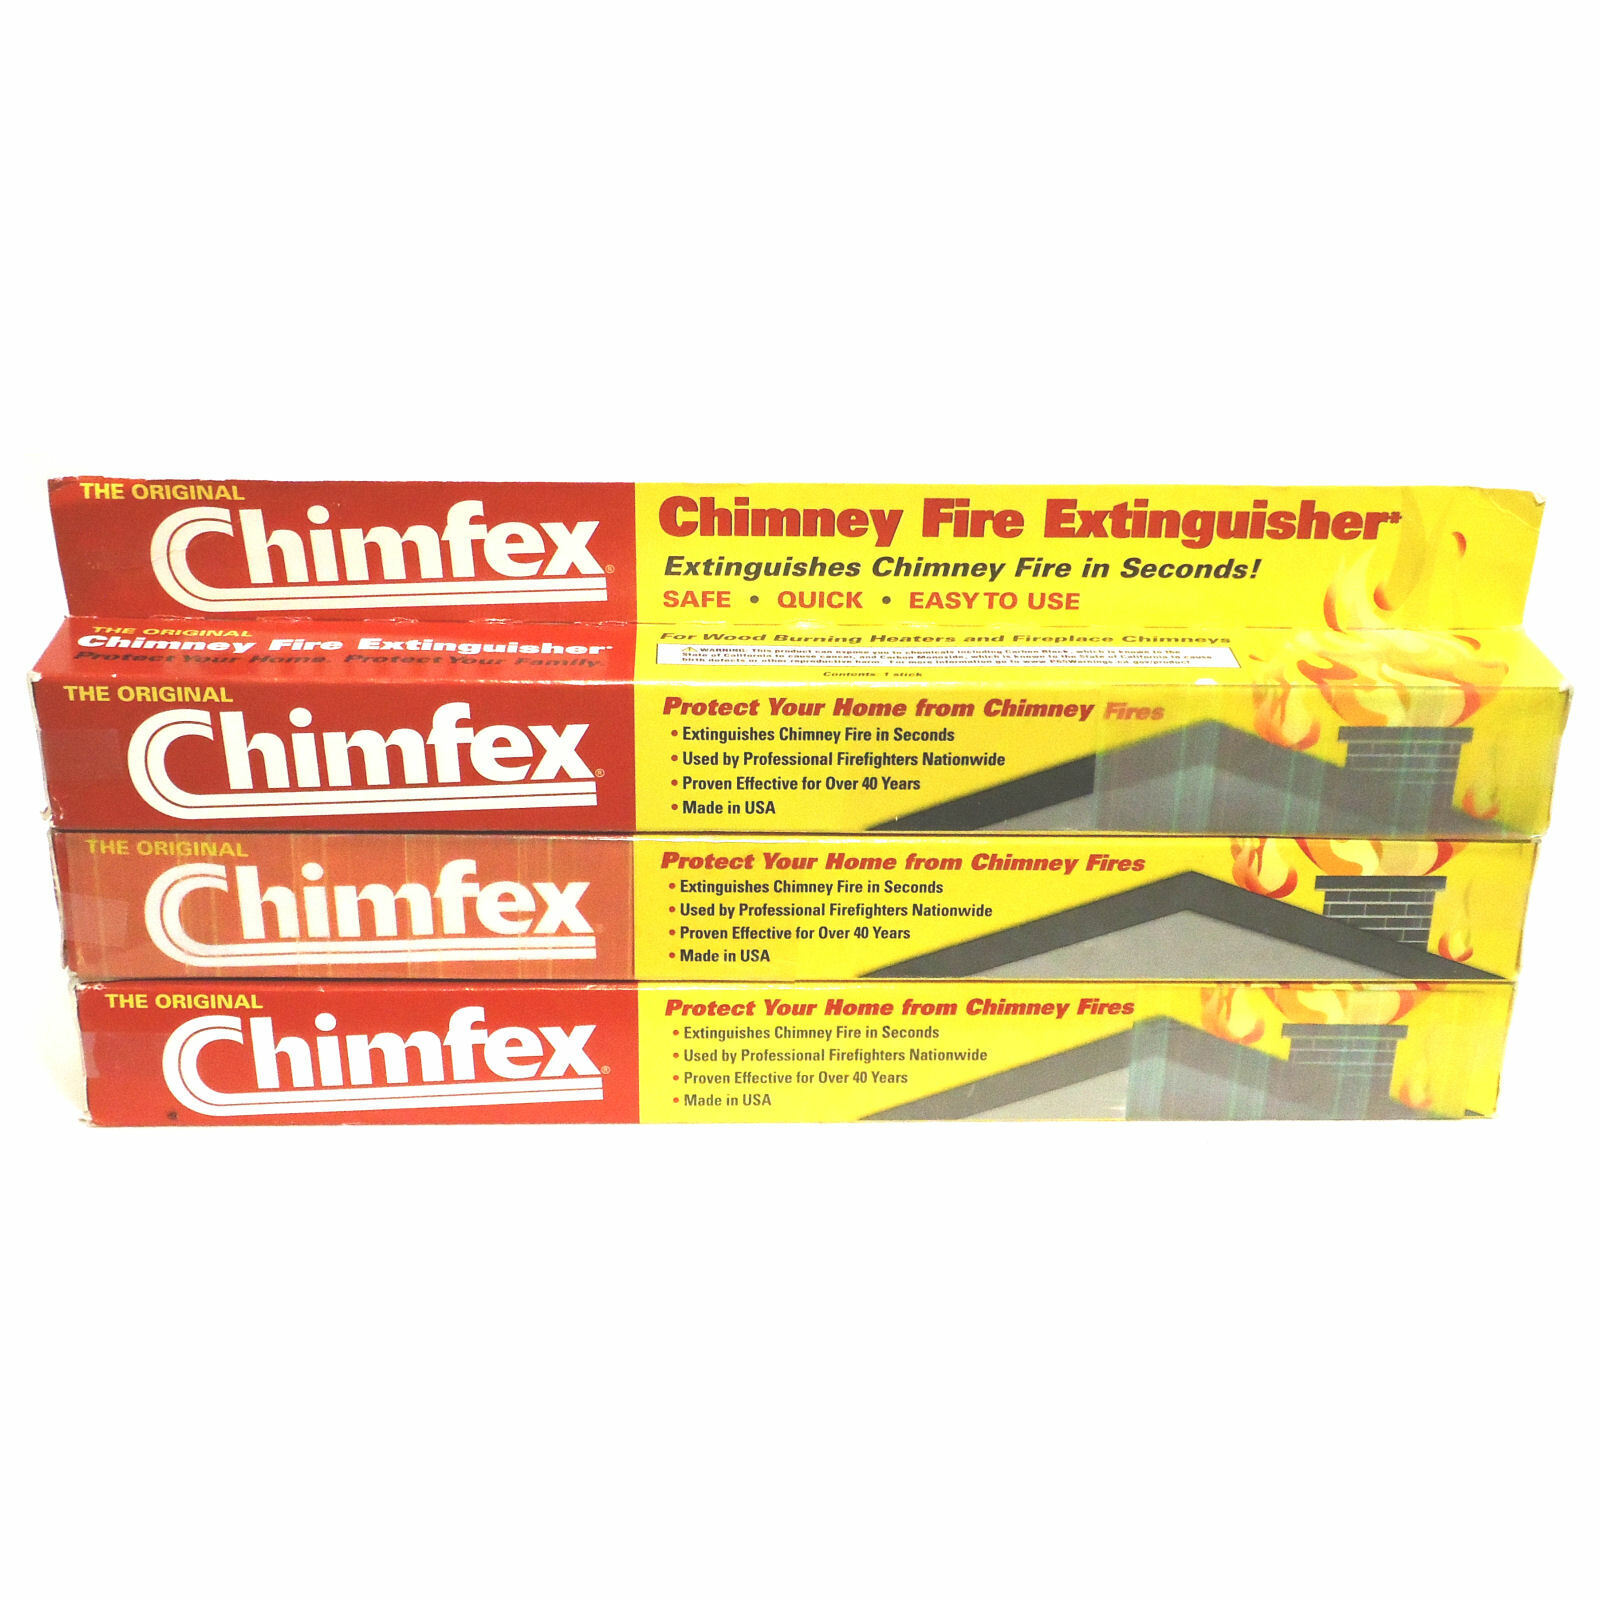 (Lot of 3) Chimfex Chimney Fire Extinguisher - Safe - Quick - Easy to Use